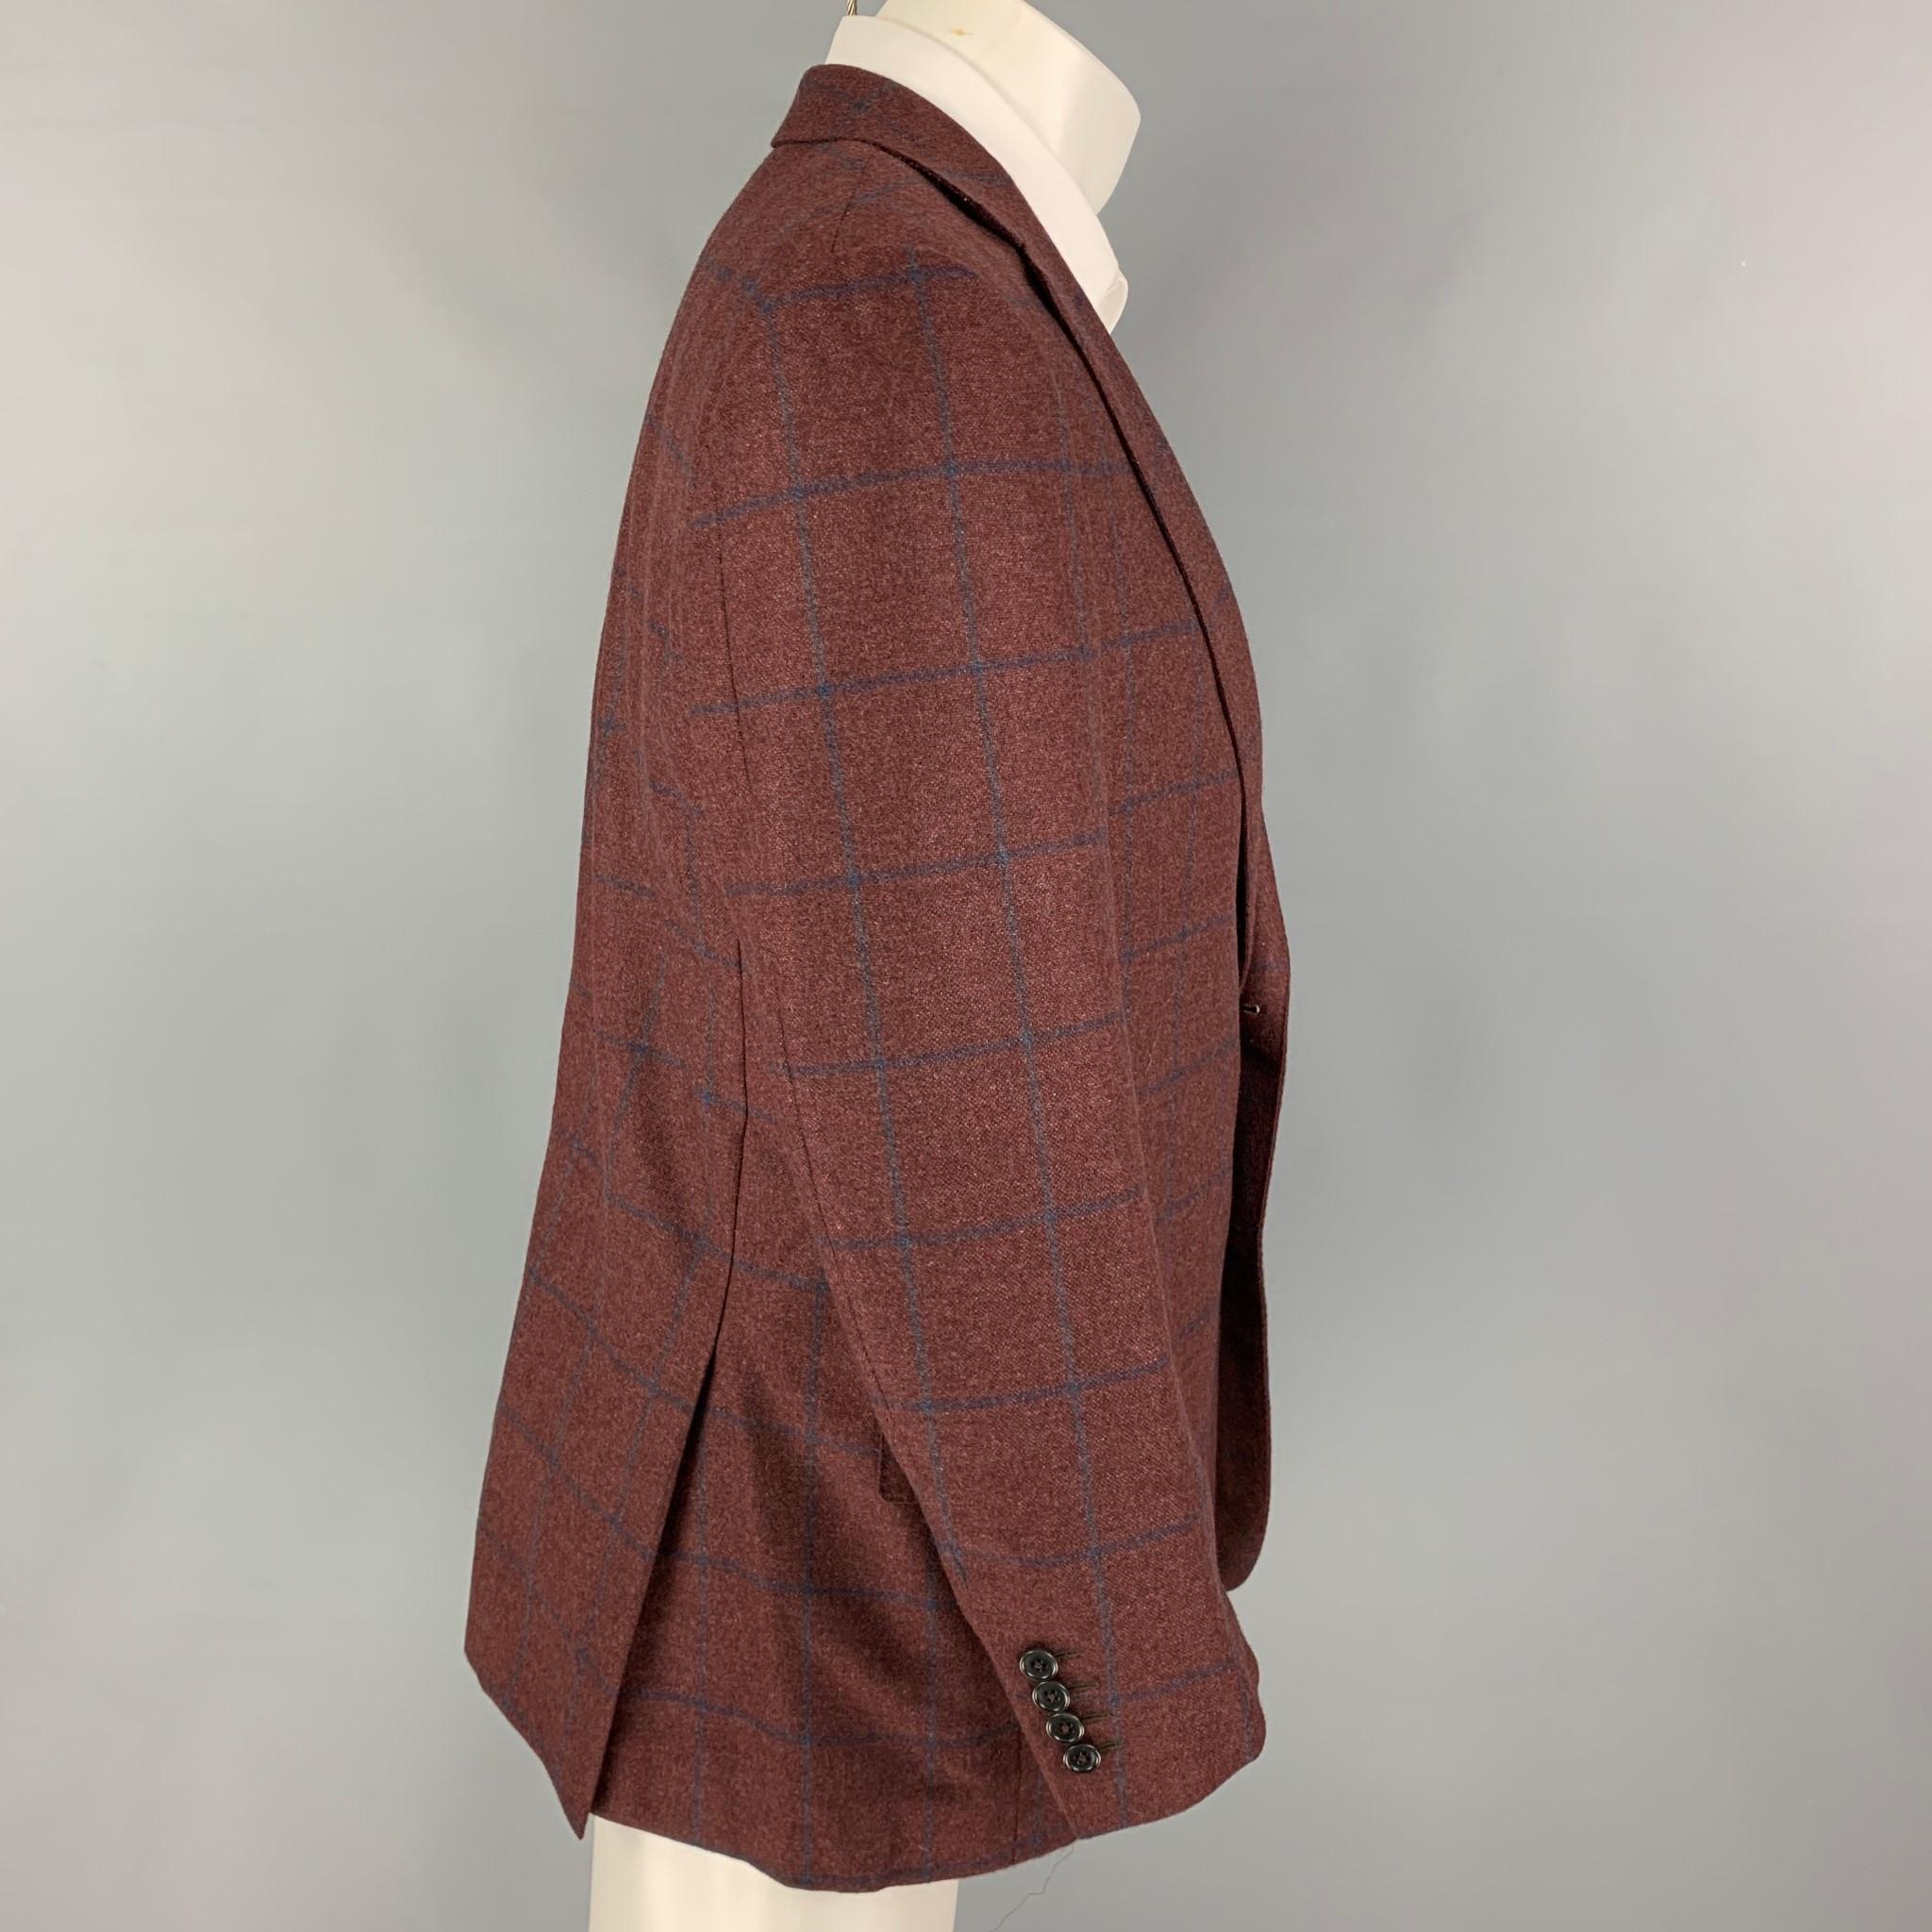 ERMENEGILDO ZEGNA sport coat comes in a burgundy & navy window pane cashmere with a full liner featuring a notch lapel, flap pockets, double back vent, and a double button closure. 

Excellent Pre-Owned Condition.
Marked: 50